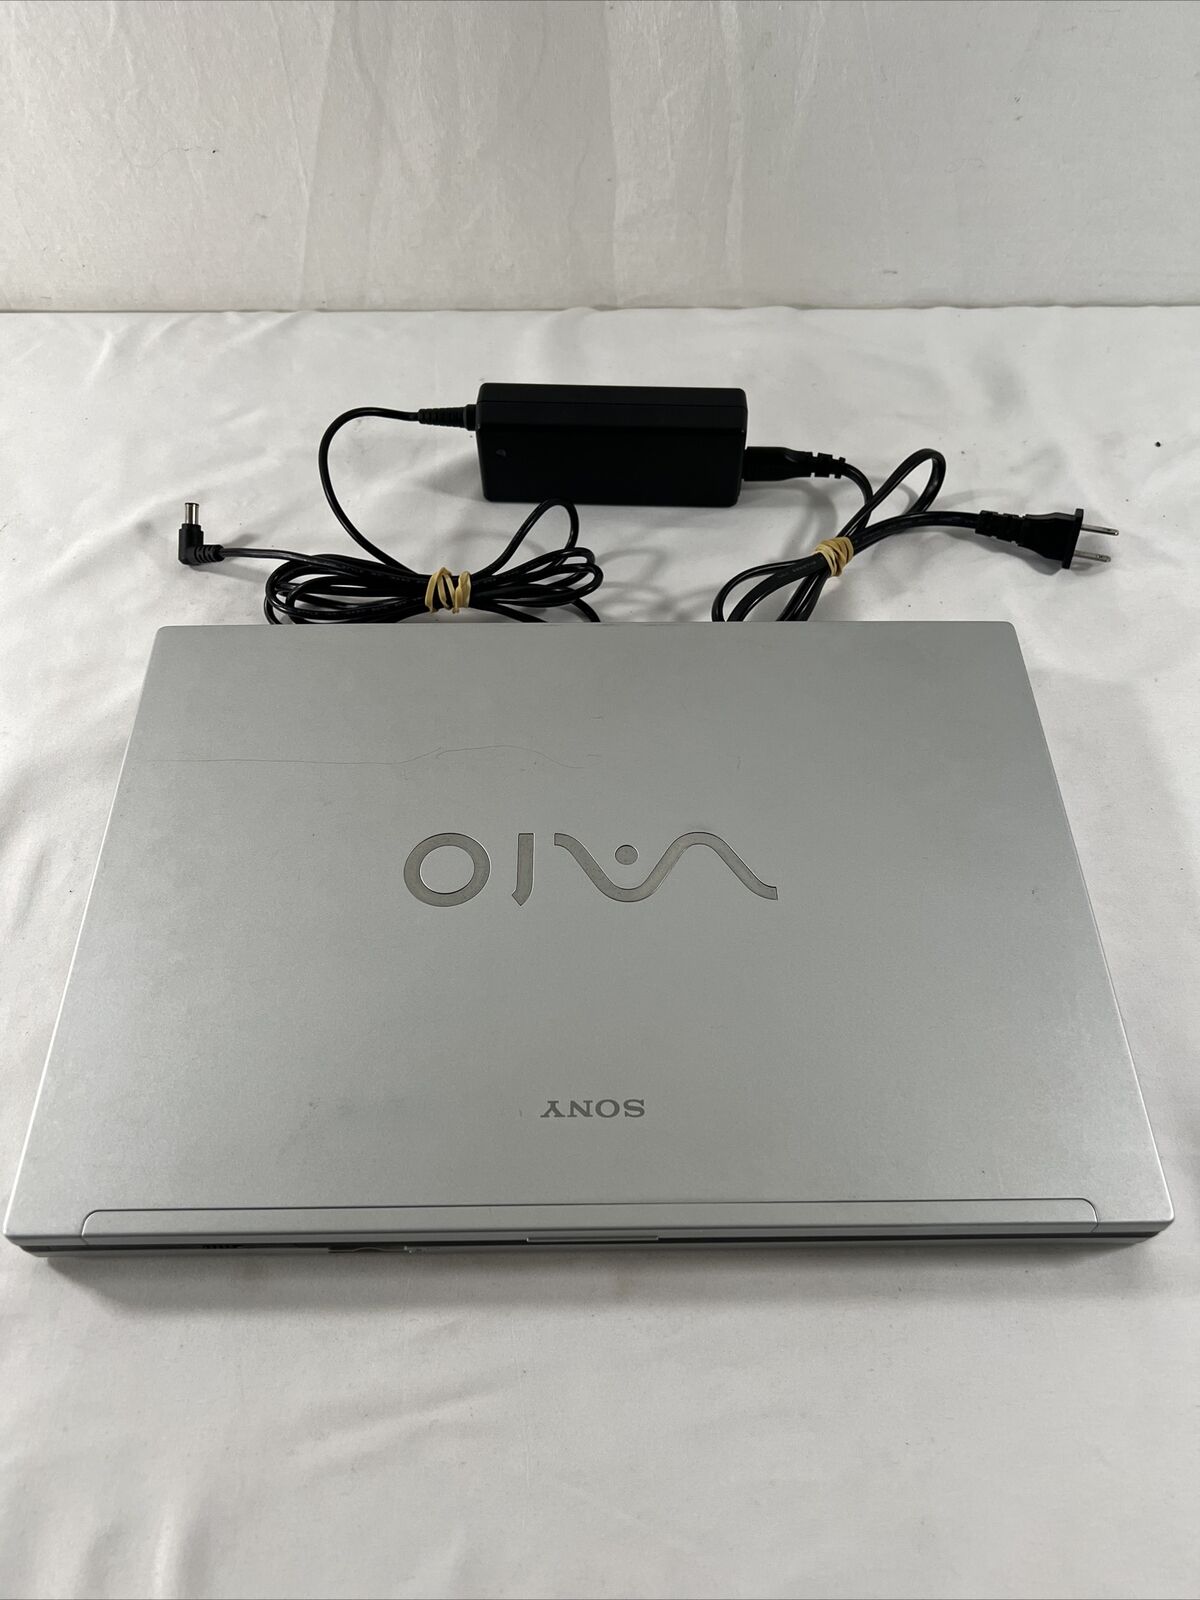 Sony PCG-394L Vaio Laptop. Tested NO HDD. Comes W/Charger.